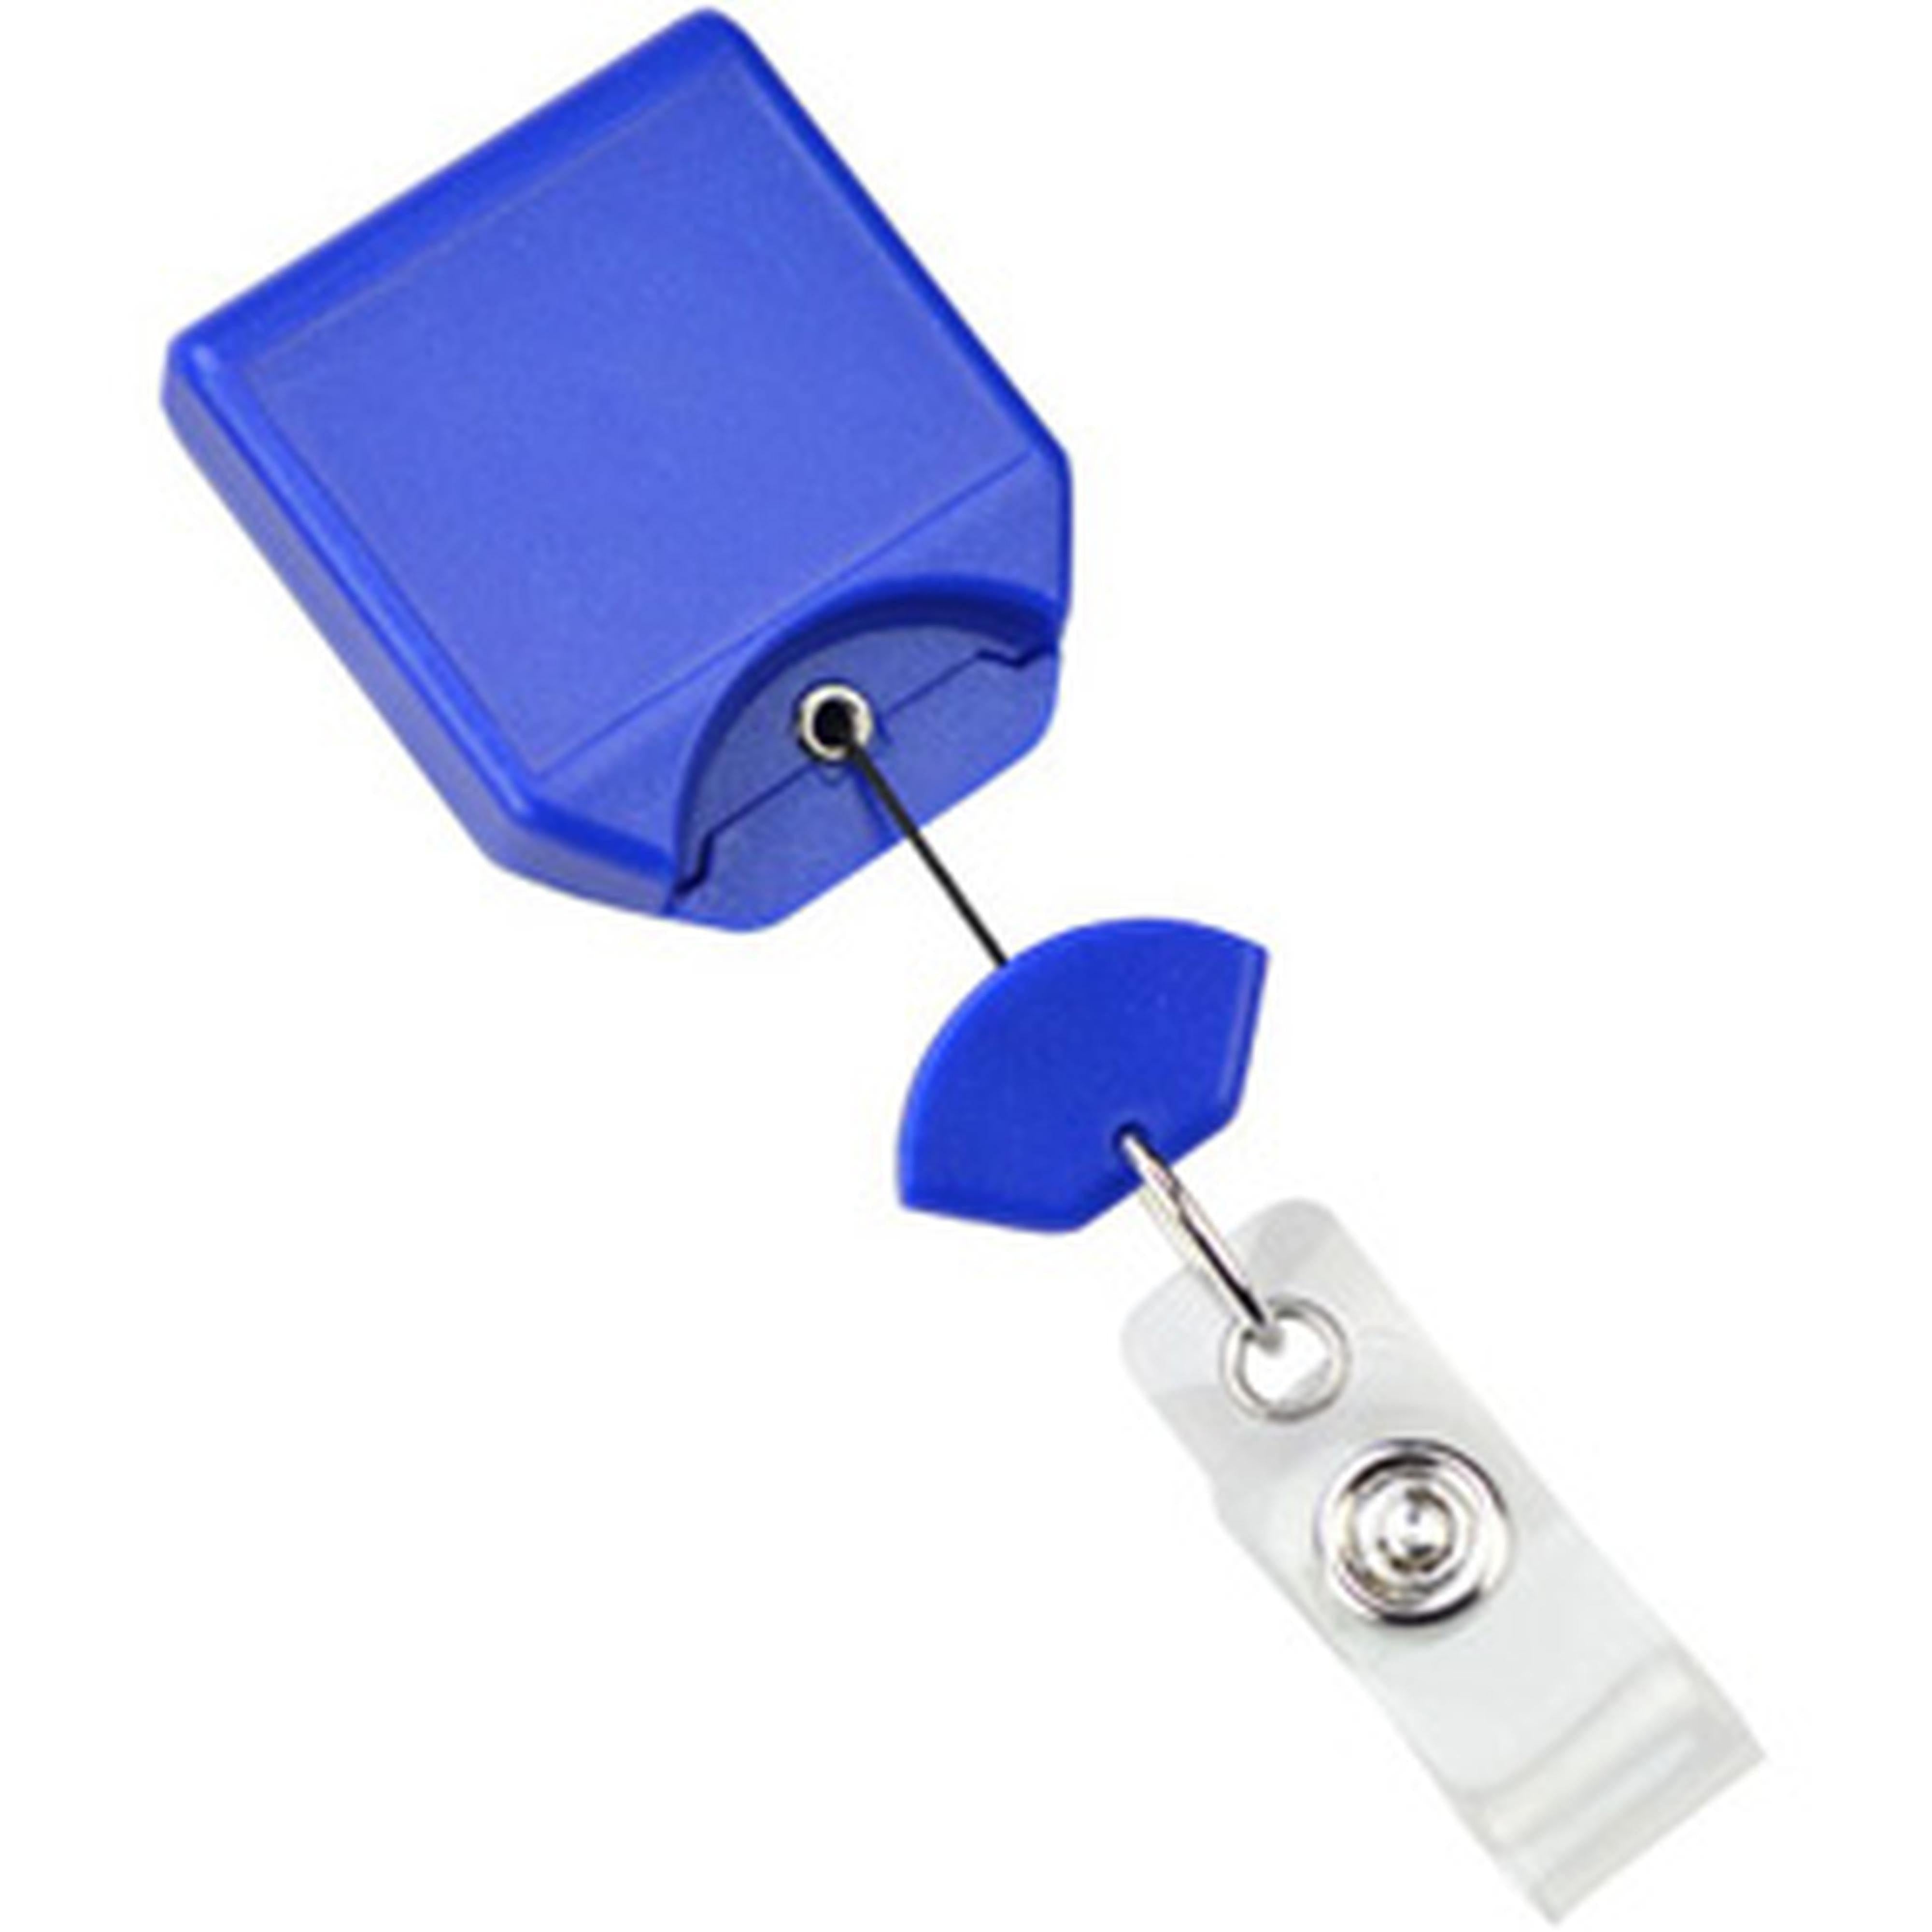 Flexible Badge Holder with Resealable Closure & Key Ring, Credit Card